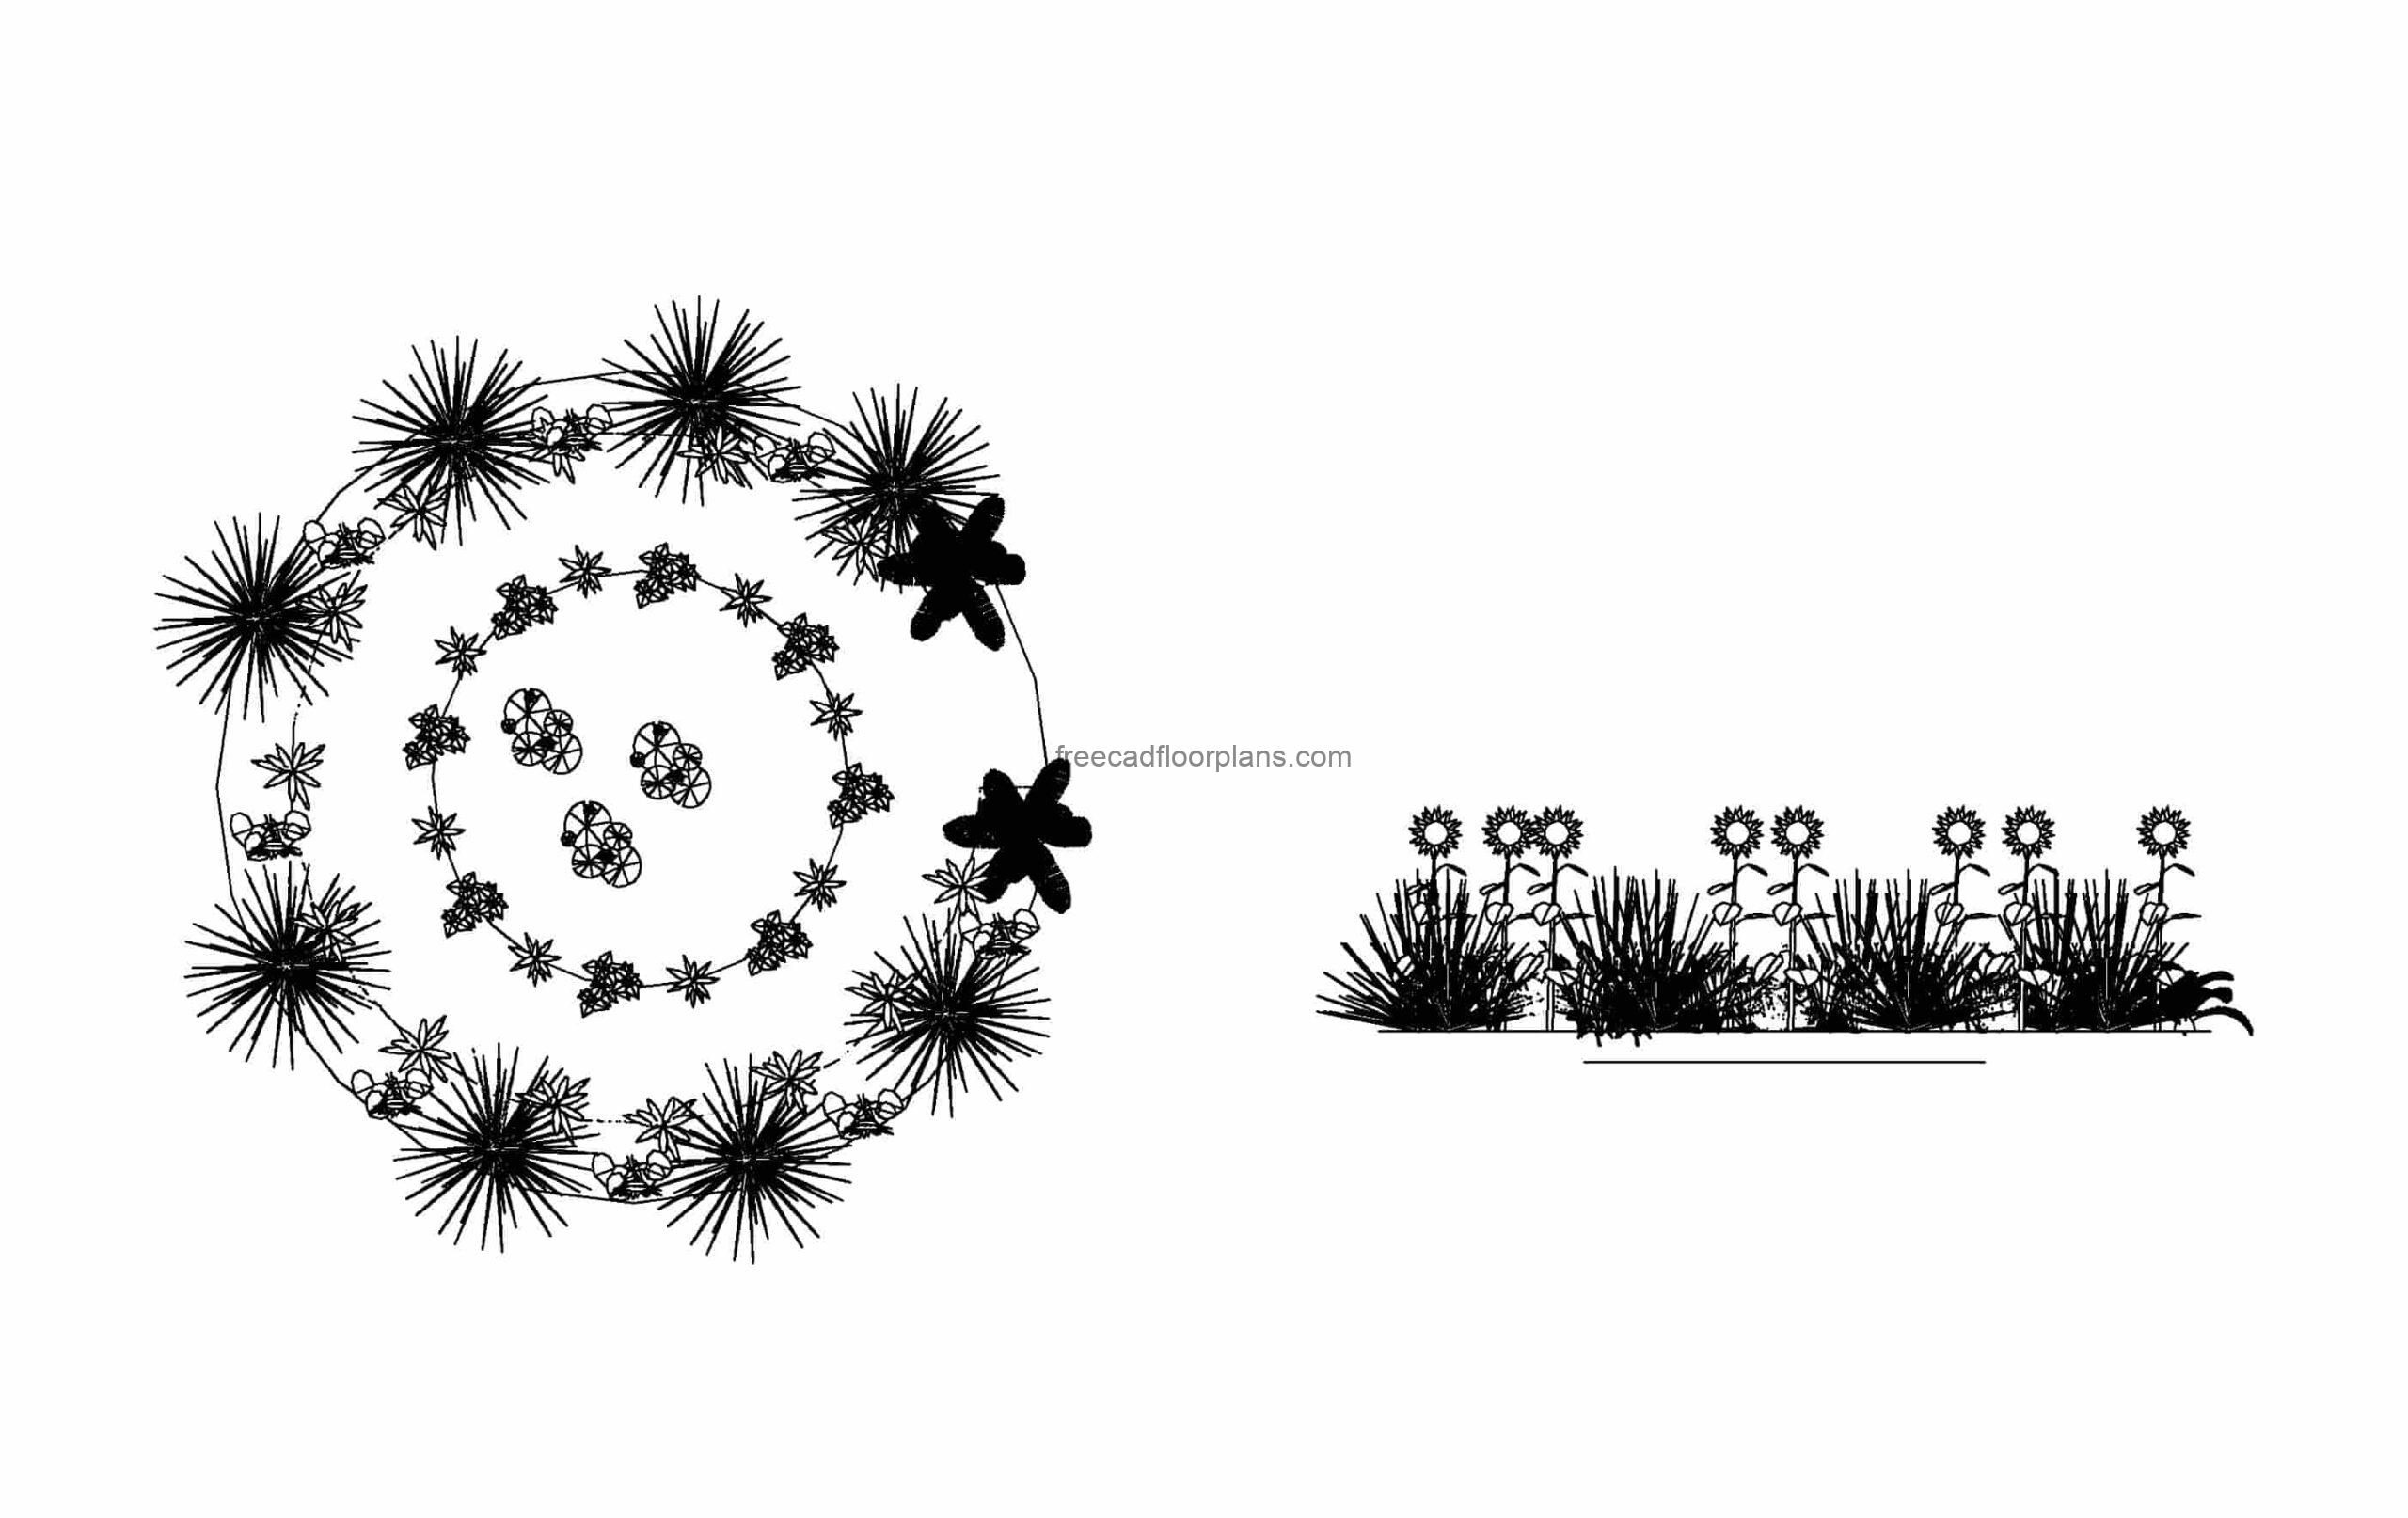 circular pond garden autocad drawing plan and elevations 2d views, dwg file for free download